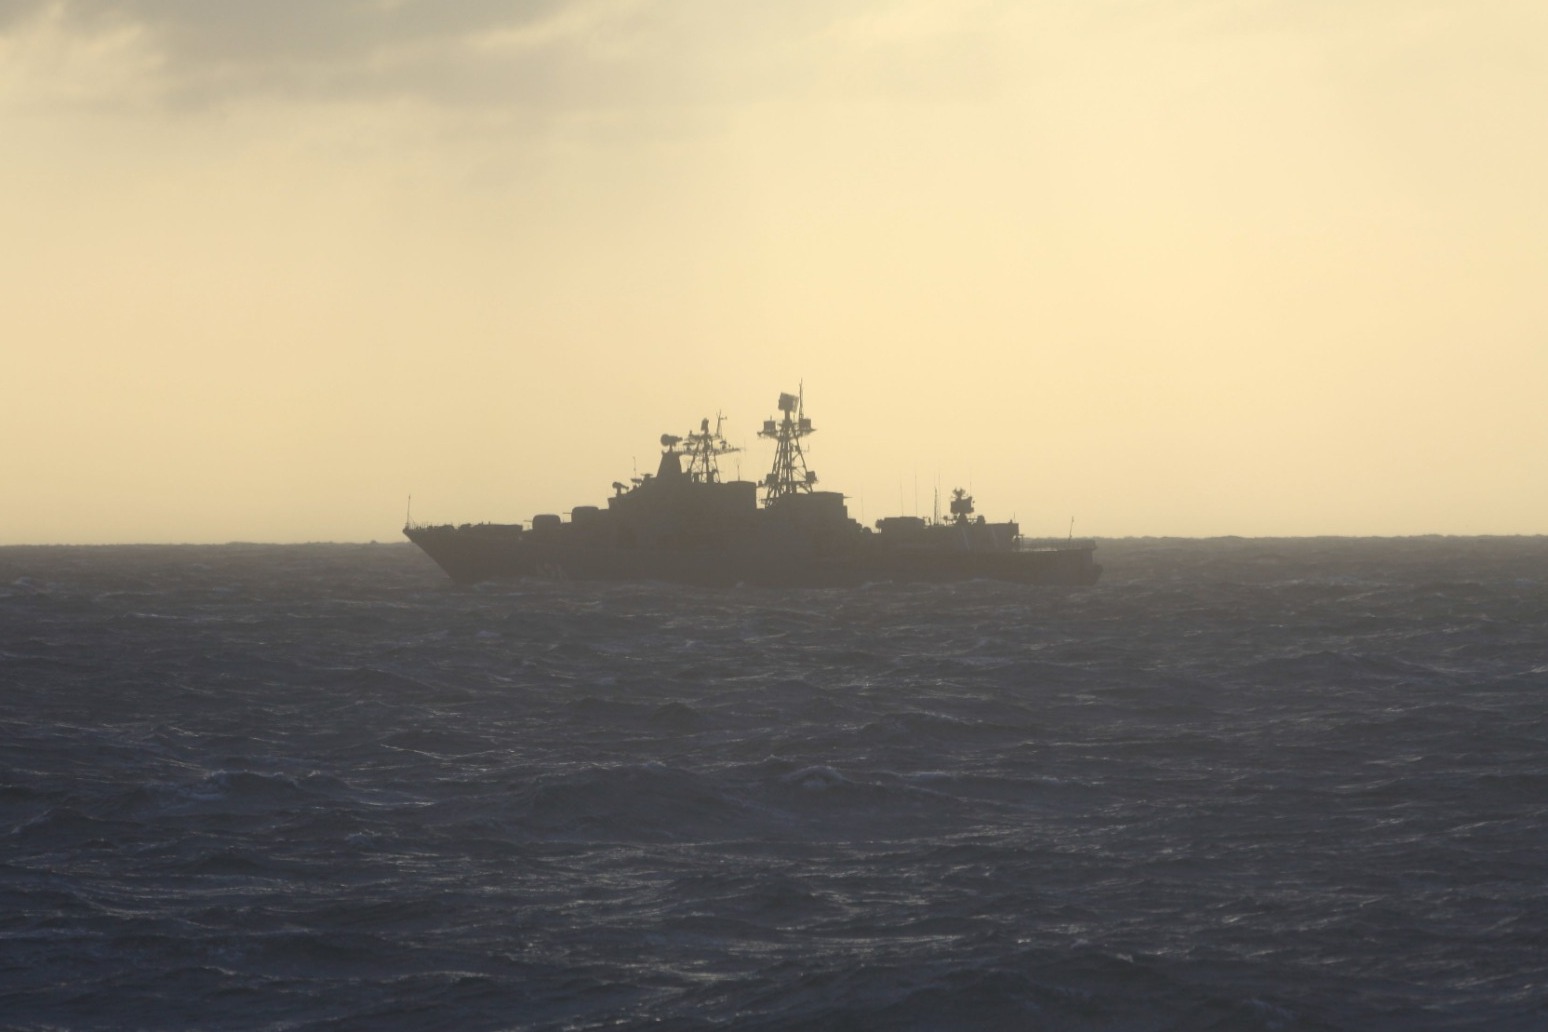 Russian warships will pass through the channel 